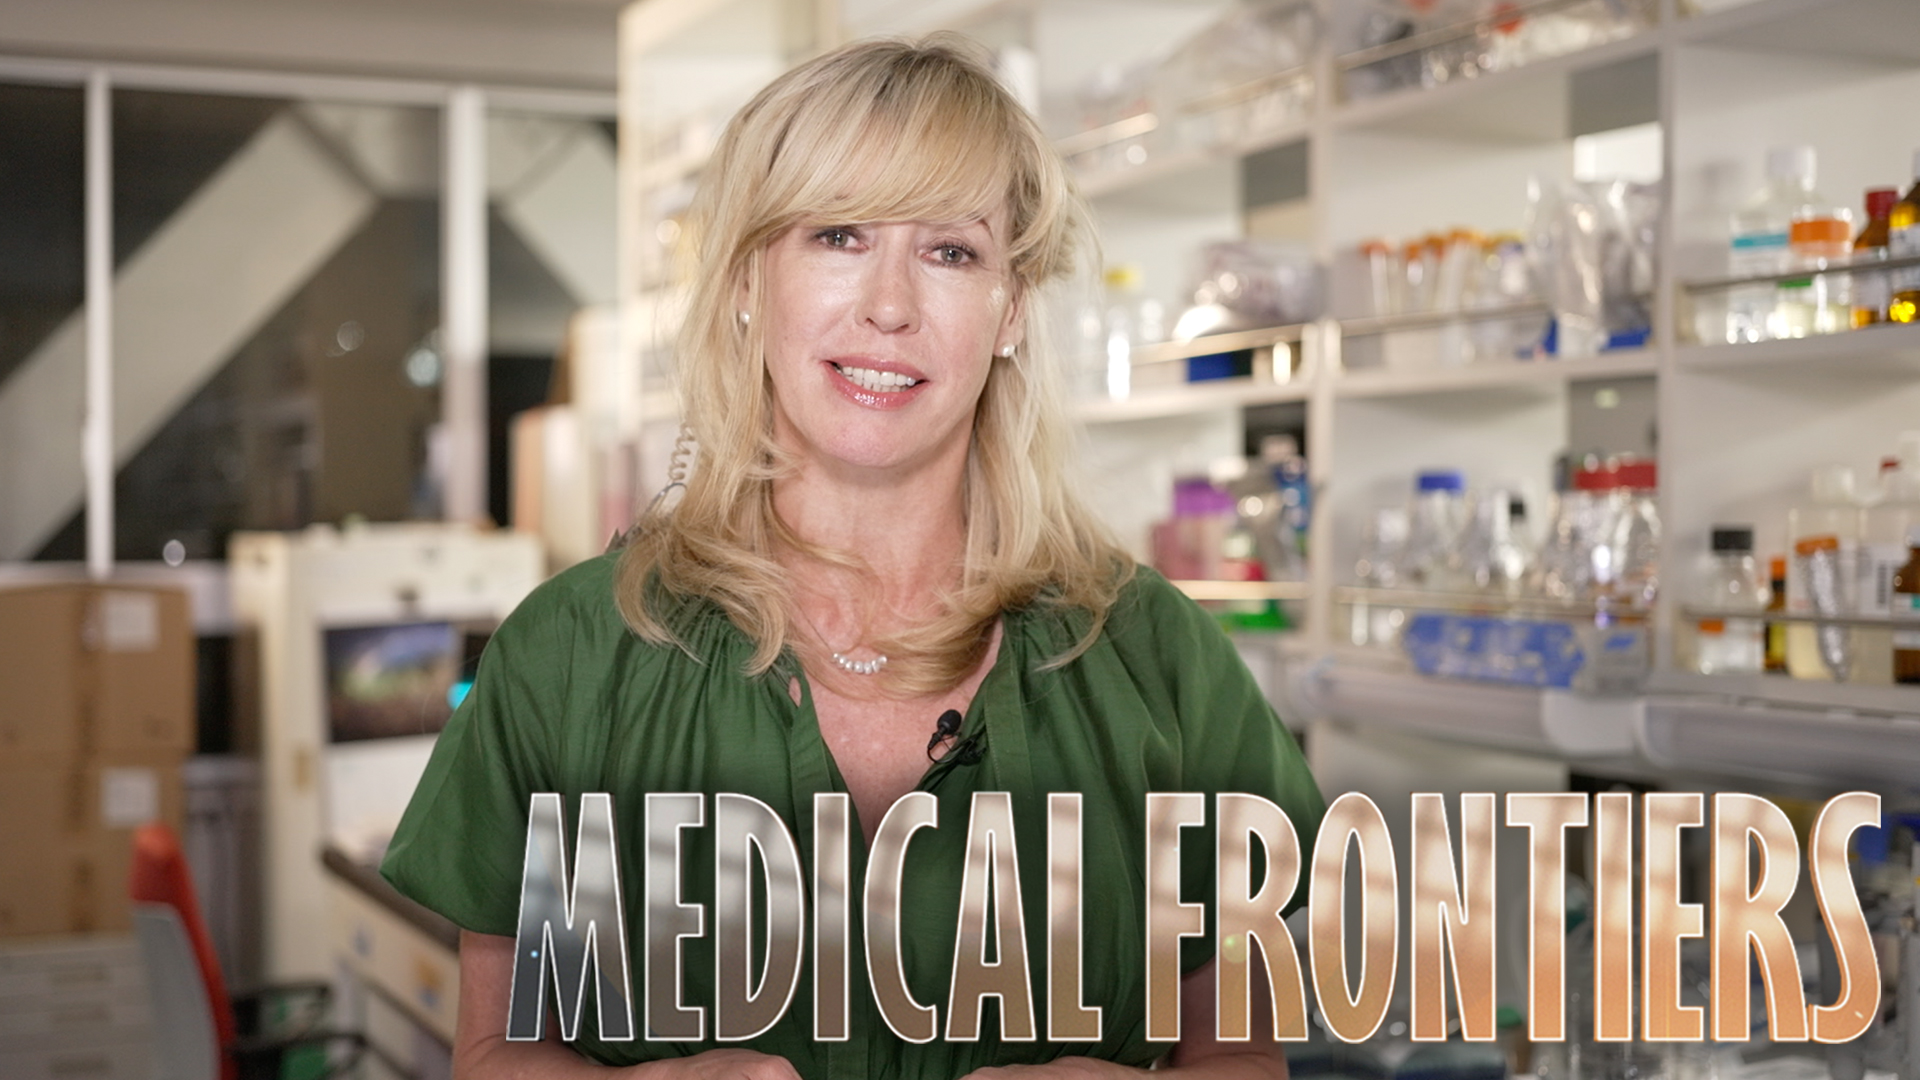 Check out Medical Frontiers Season 3 airing on a public television station near you!